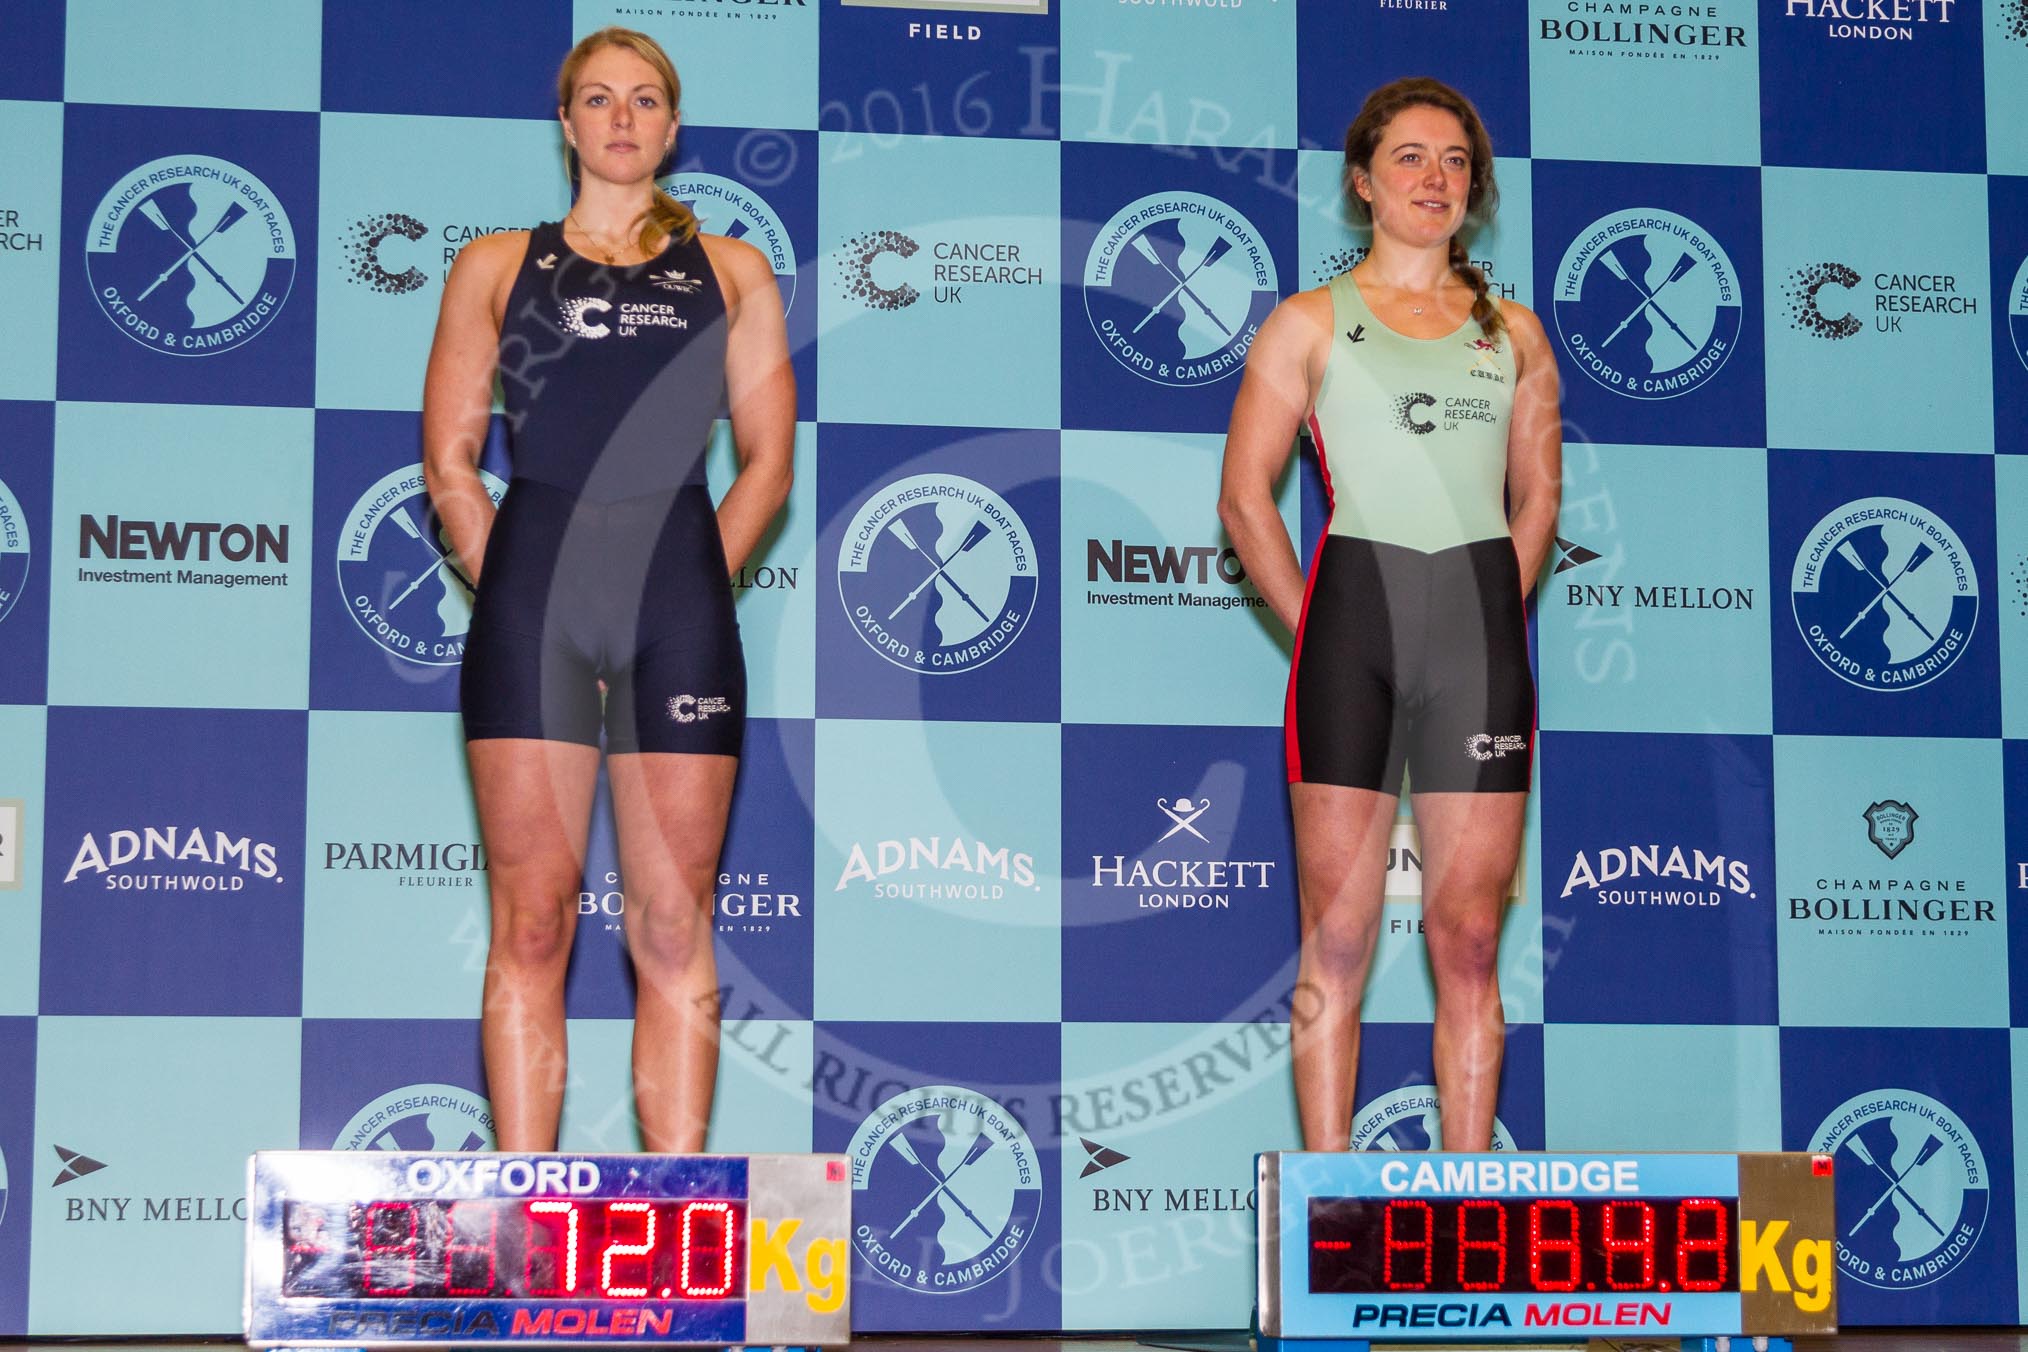 The Boat Race season 2016 - Crew Announcement and Weigh-In: The Women's Boat Race, 2 seat: Oxford: Emma Spruce – 72.0k, Cambridge: Fiona Macklin – 64.0kg.
Westmister Hall, Westminster,
London SW11,

United Kingdom,
on 01 March 2016 at 10:09, image #21